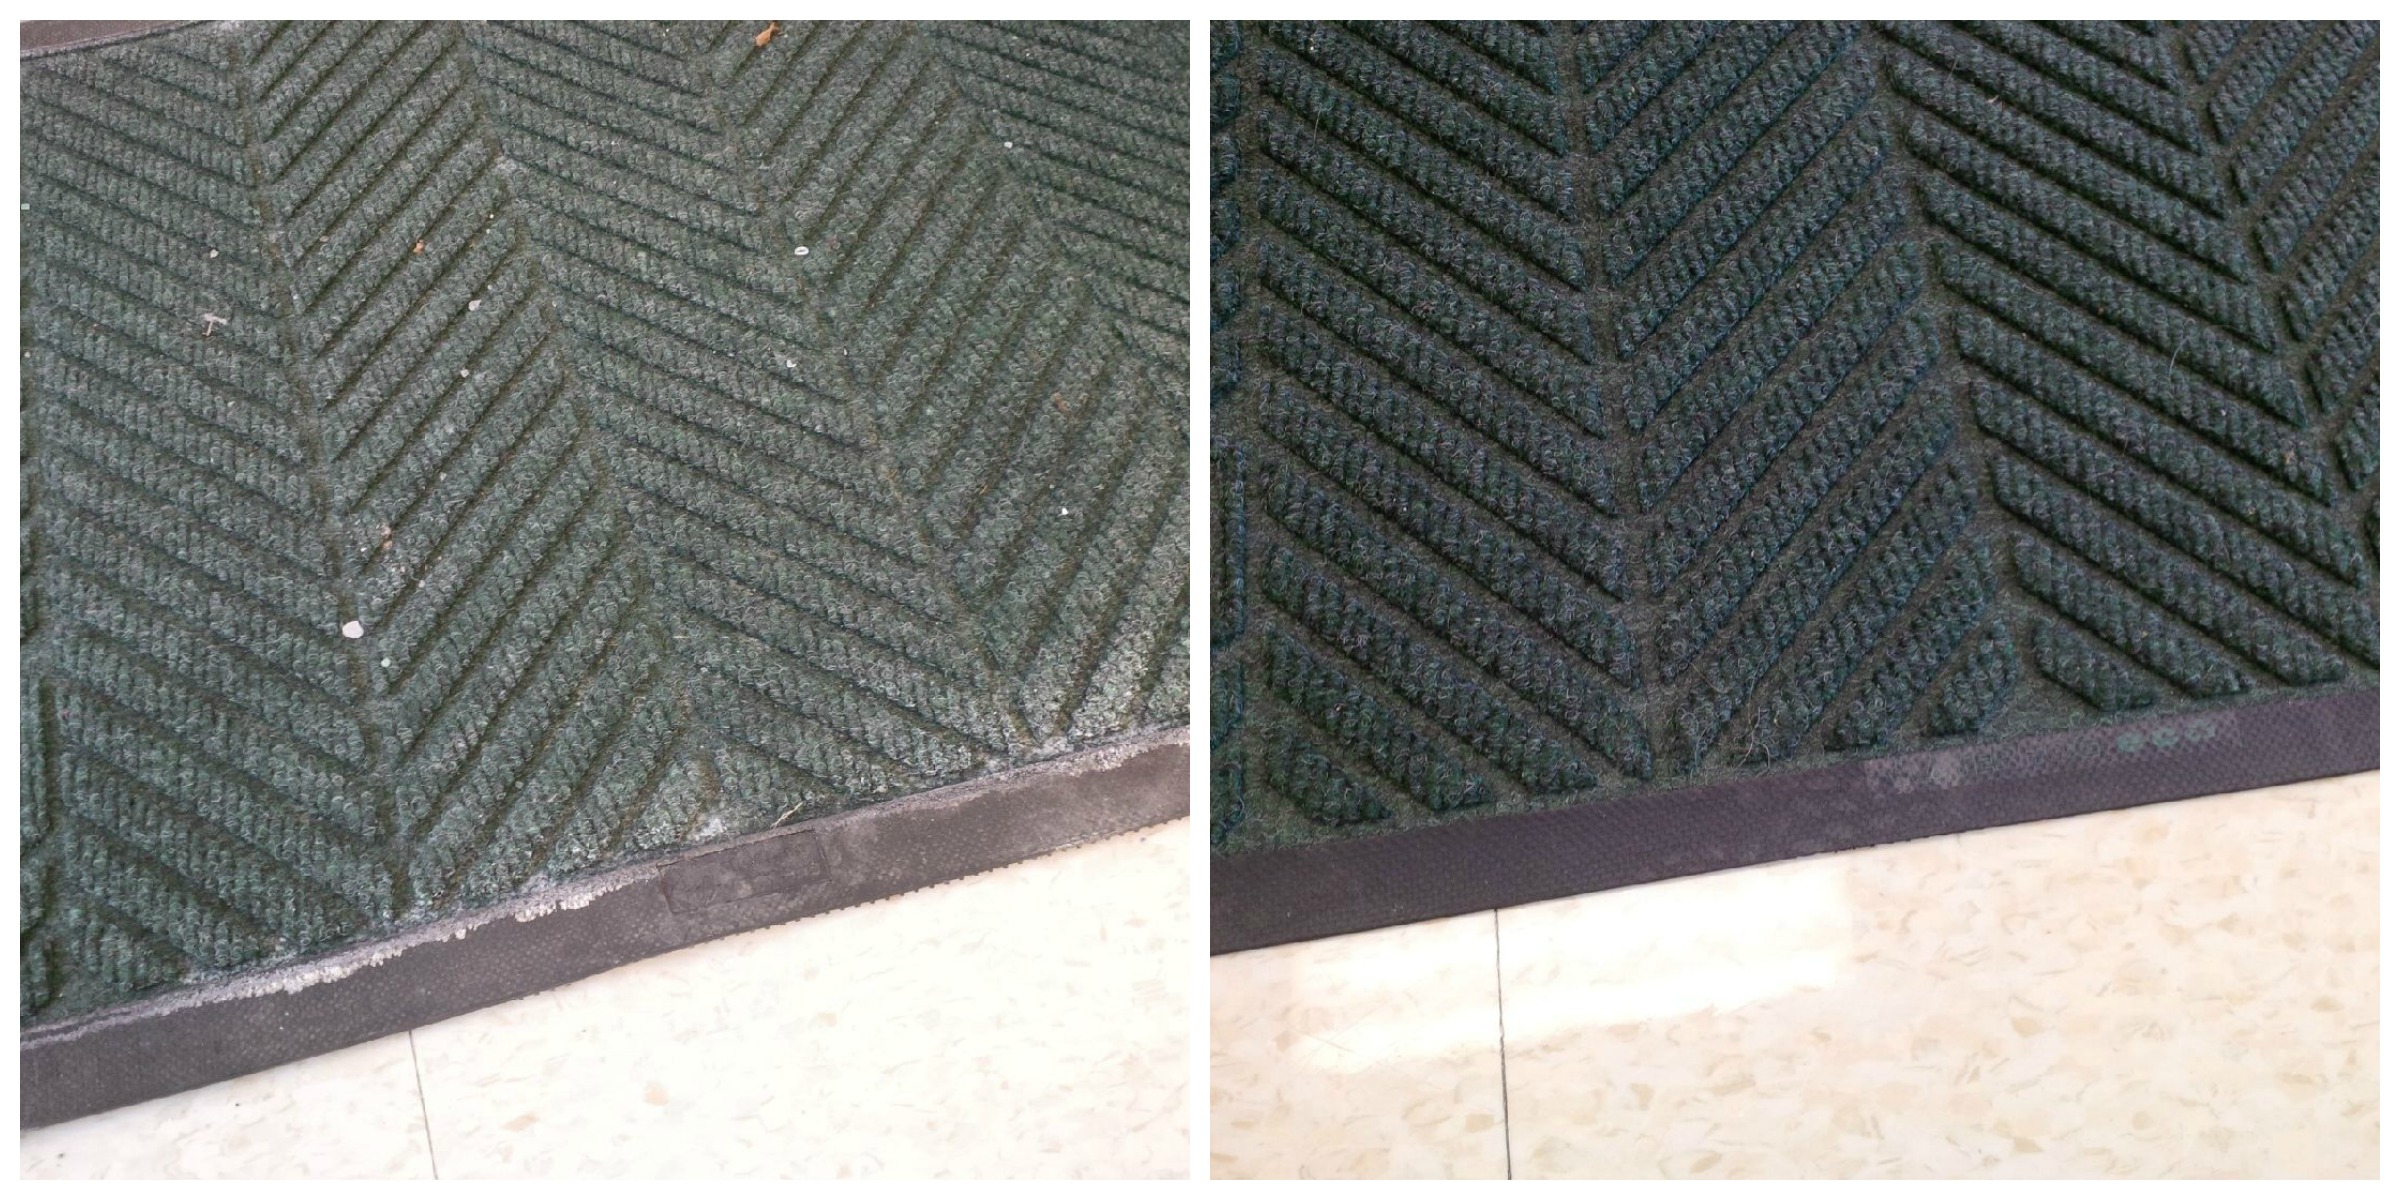 This picture shows the difference winter rinse makes in removing salt stains from entrance matting.